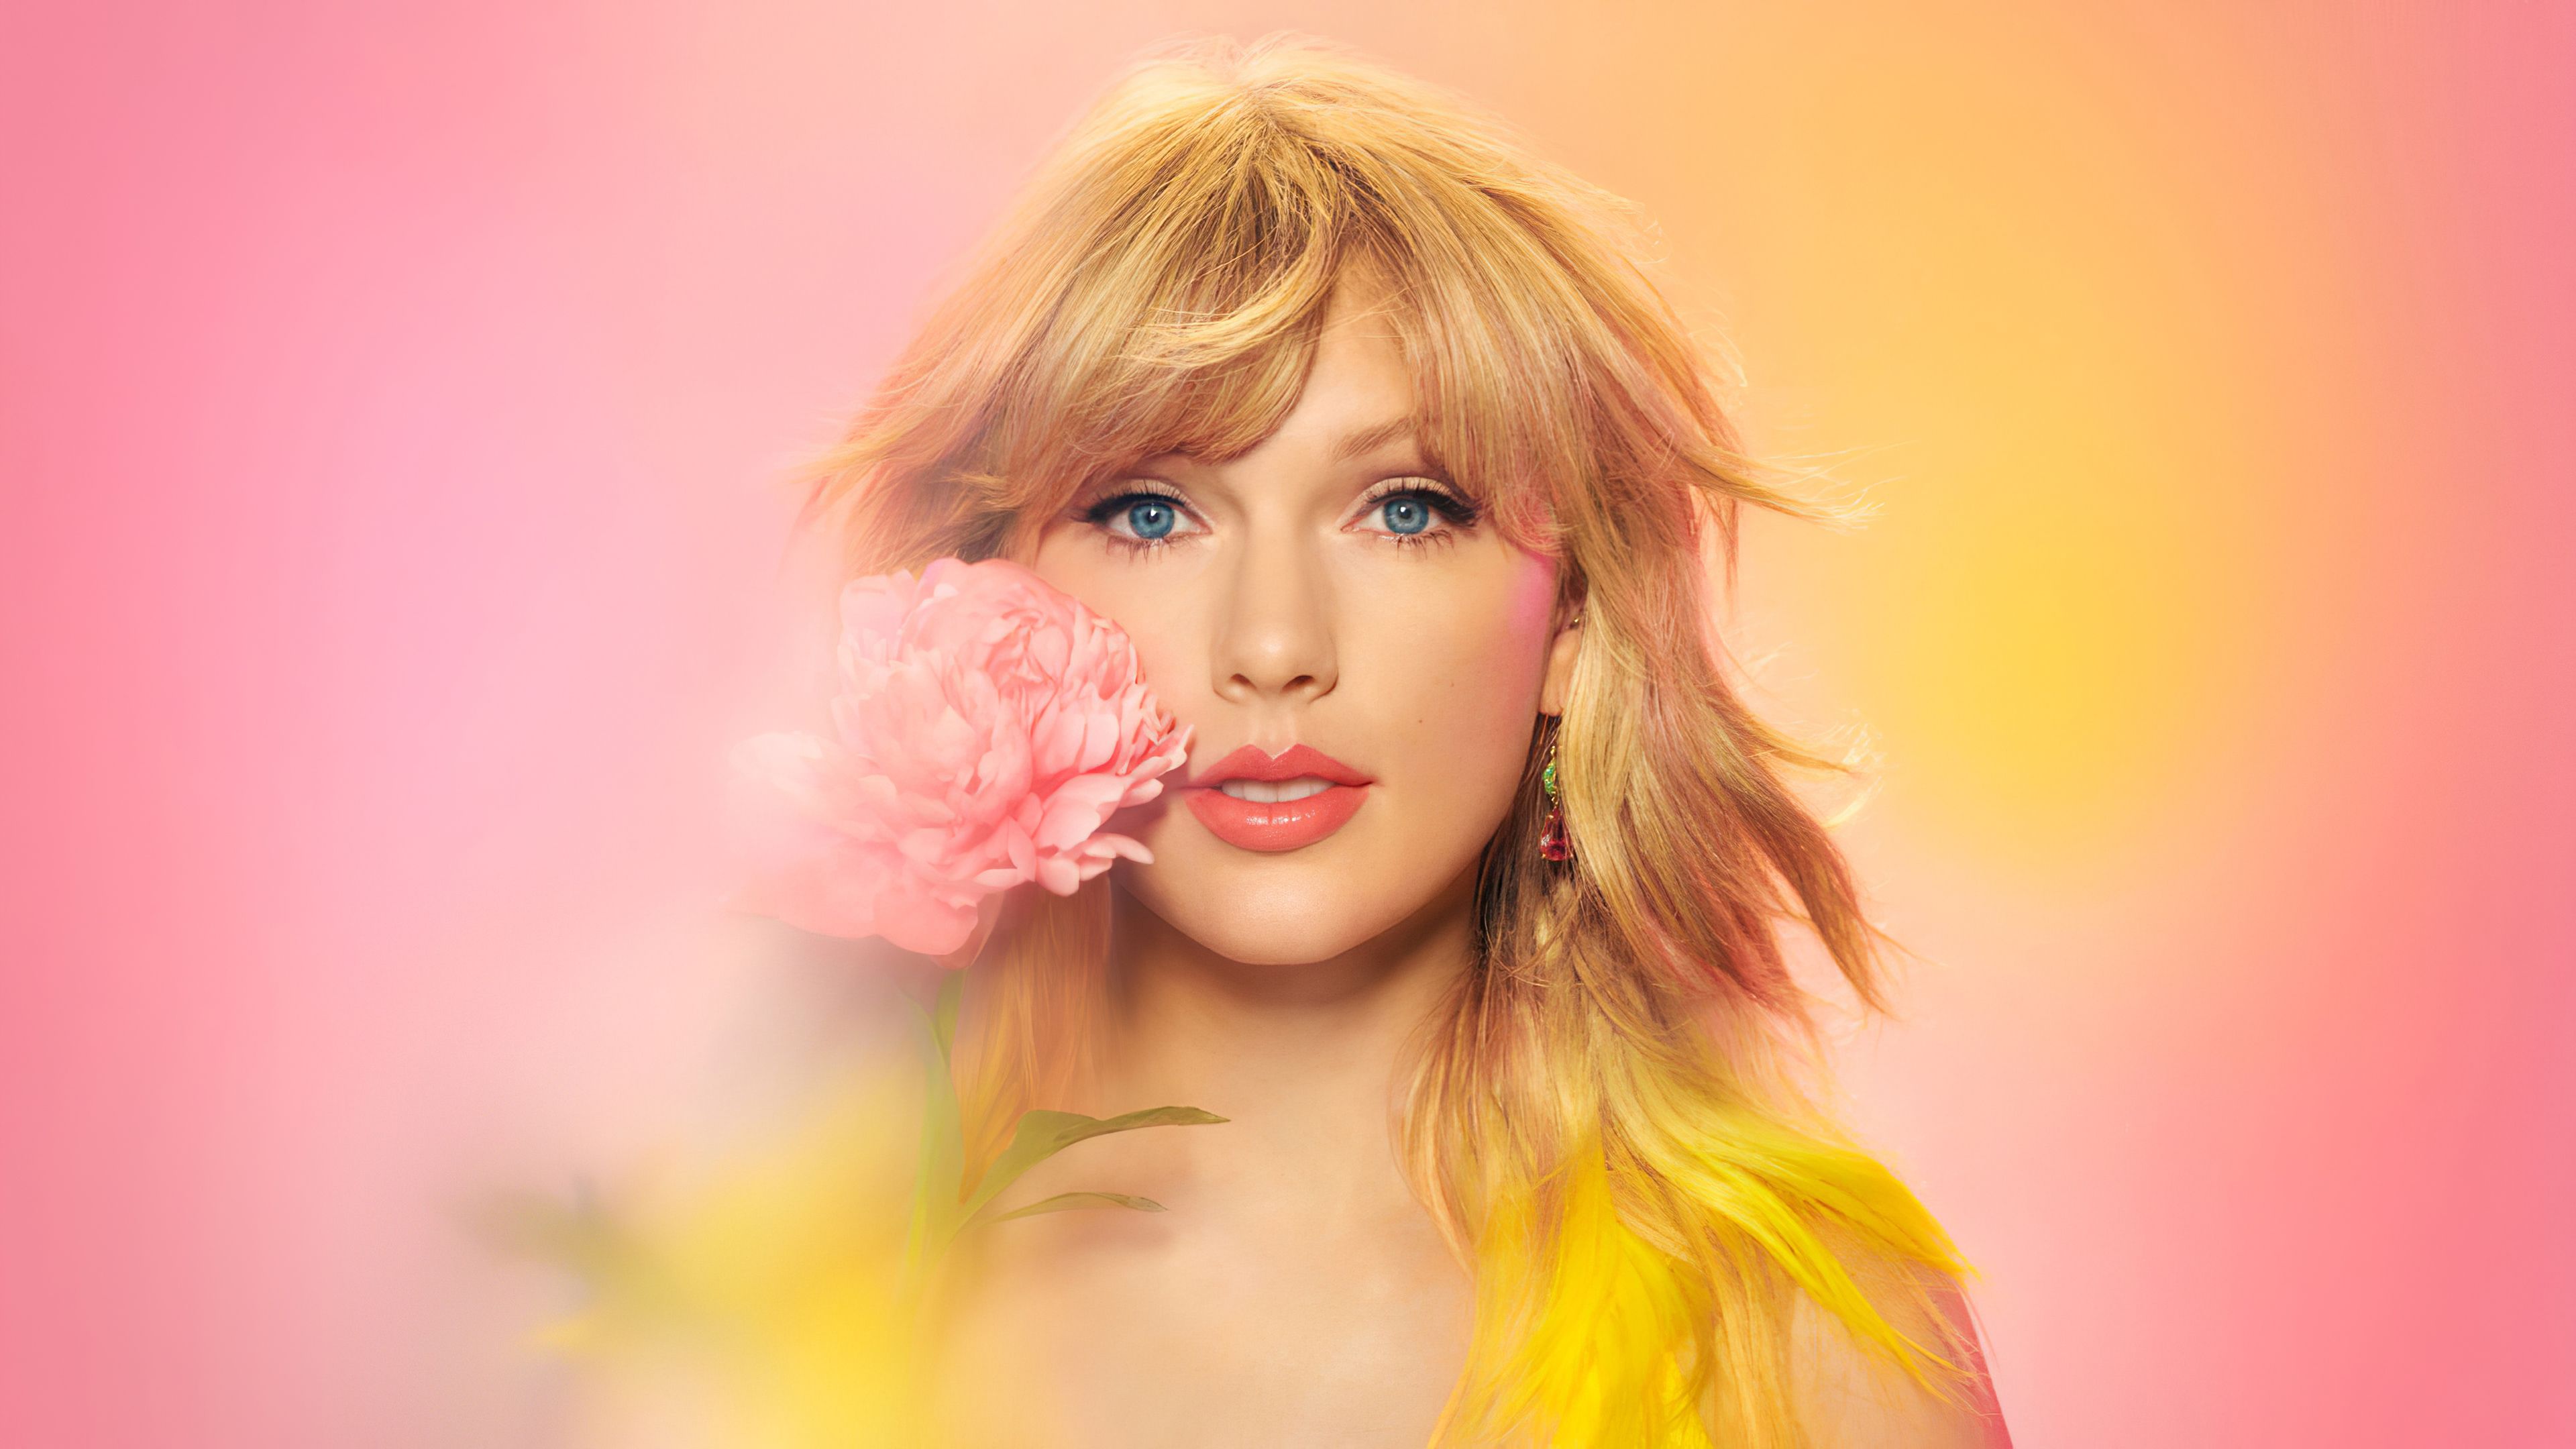 A blonde woman with bangs holding a pink flower to her face - Taylor Swift